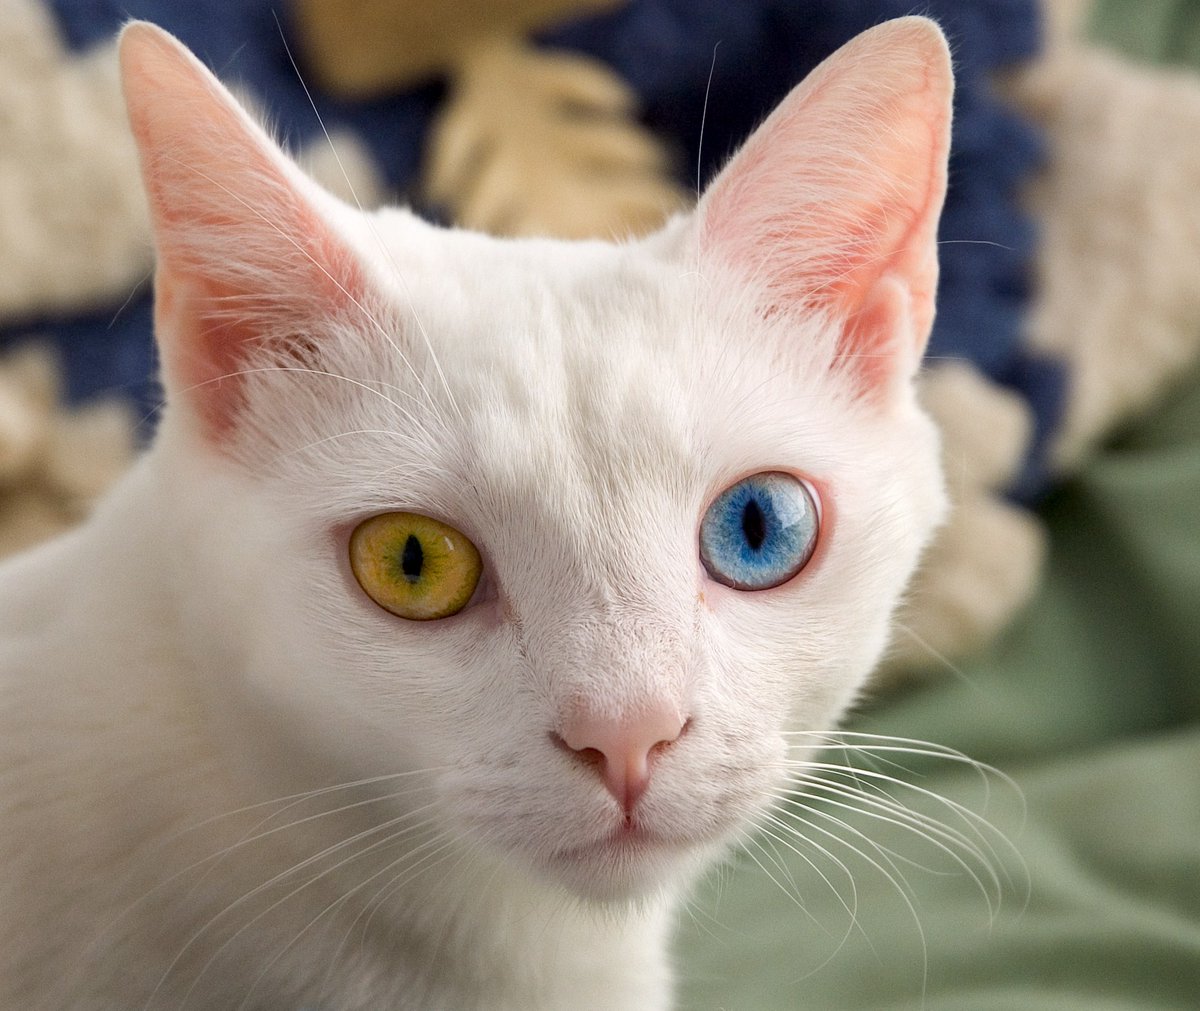 JaebeomJaebeom has such a unqiue voice when singing and it's just like damn i love it, so here's a unique cat cos of it's eyes